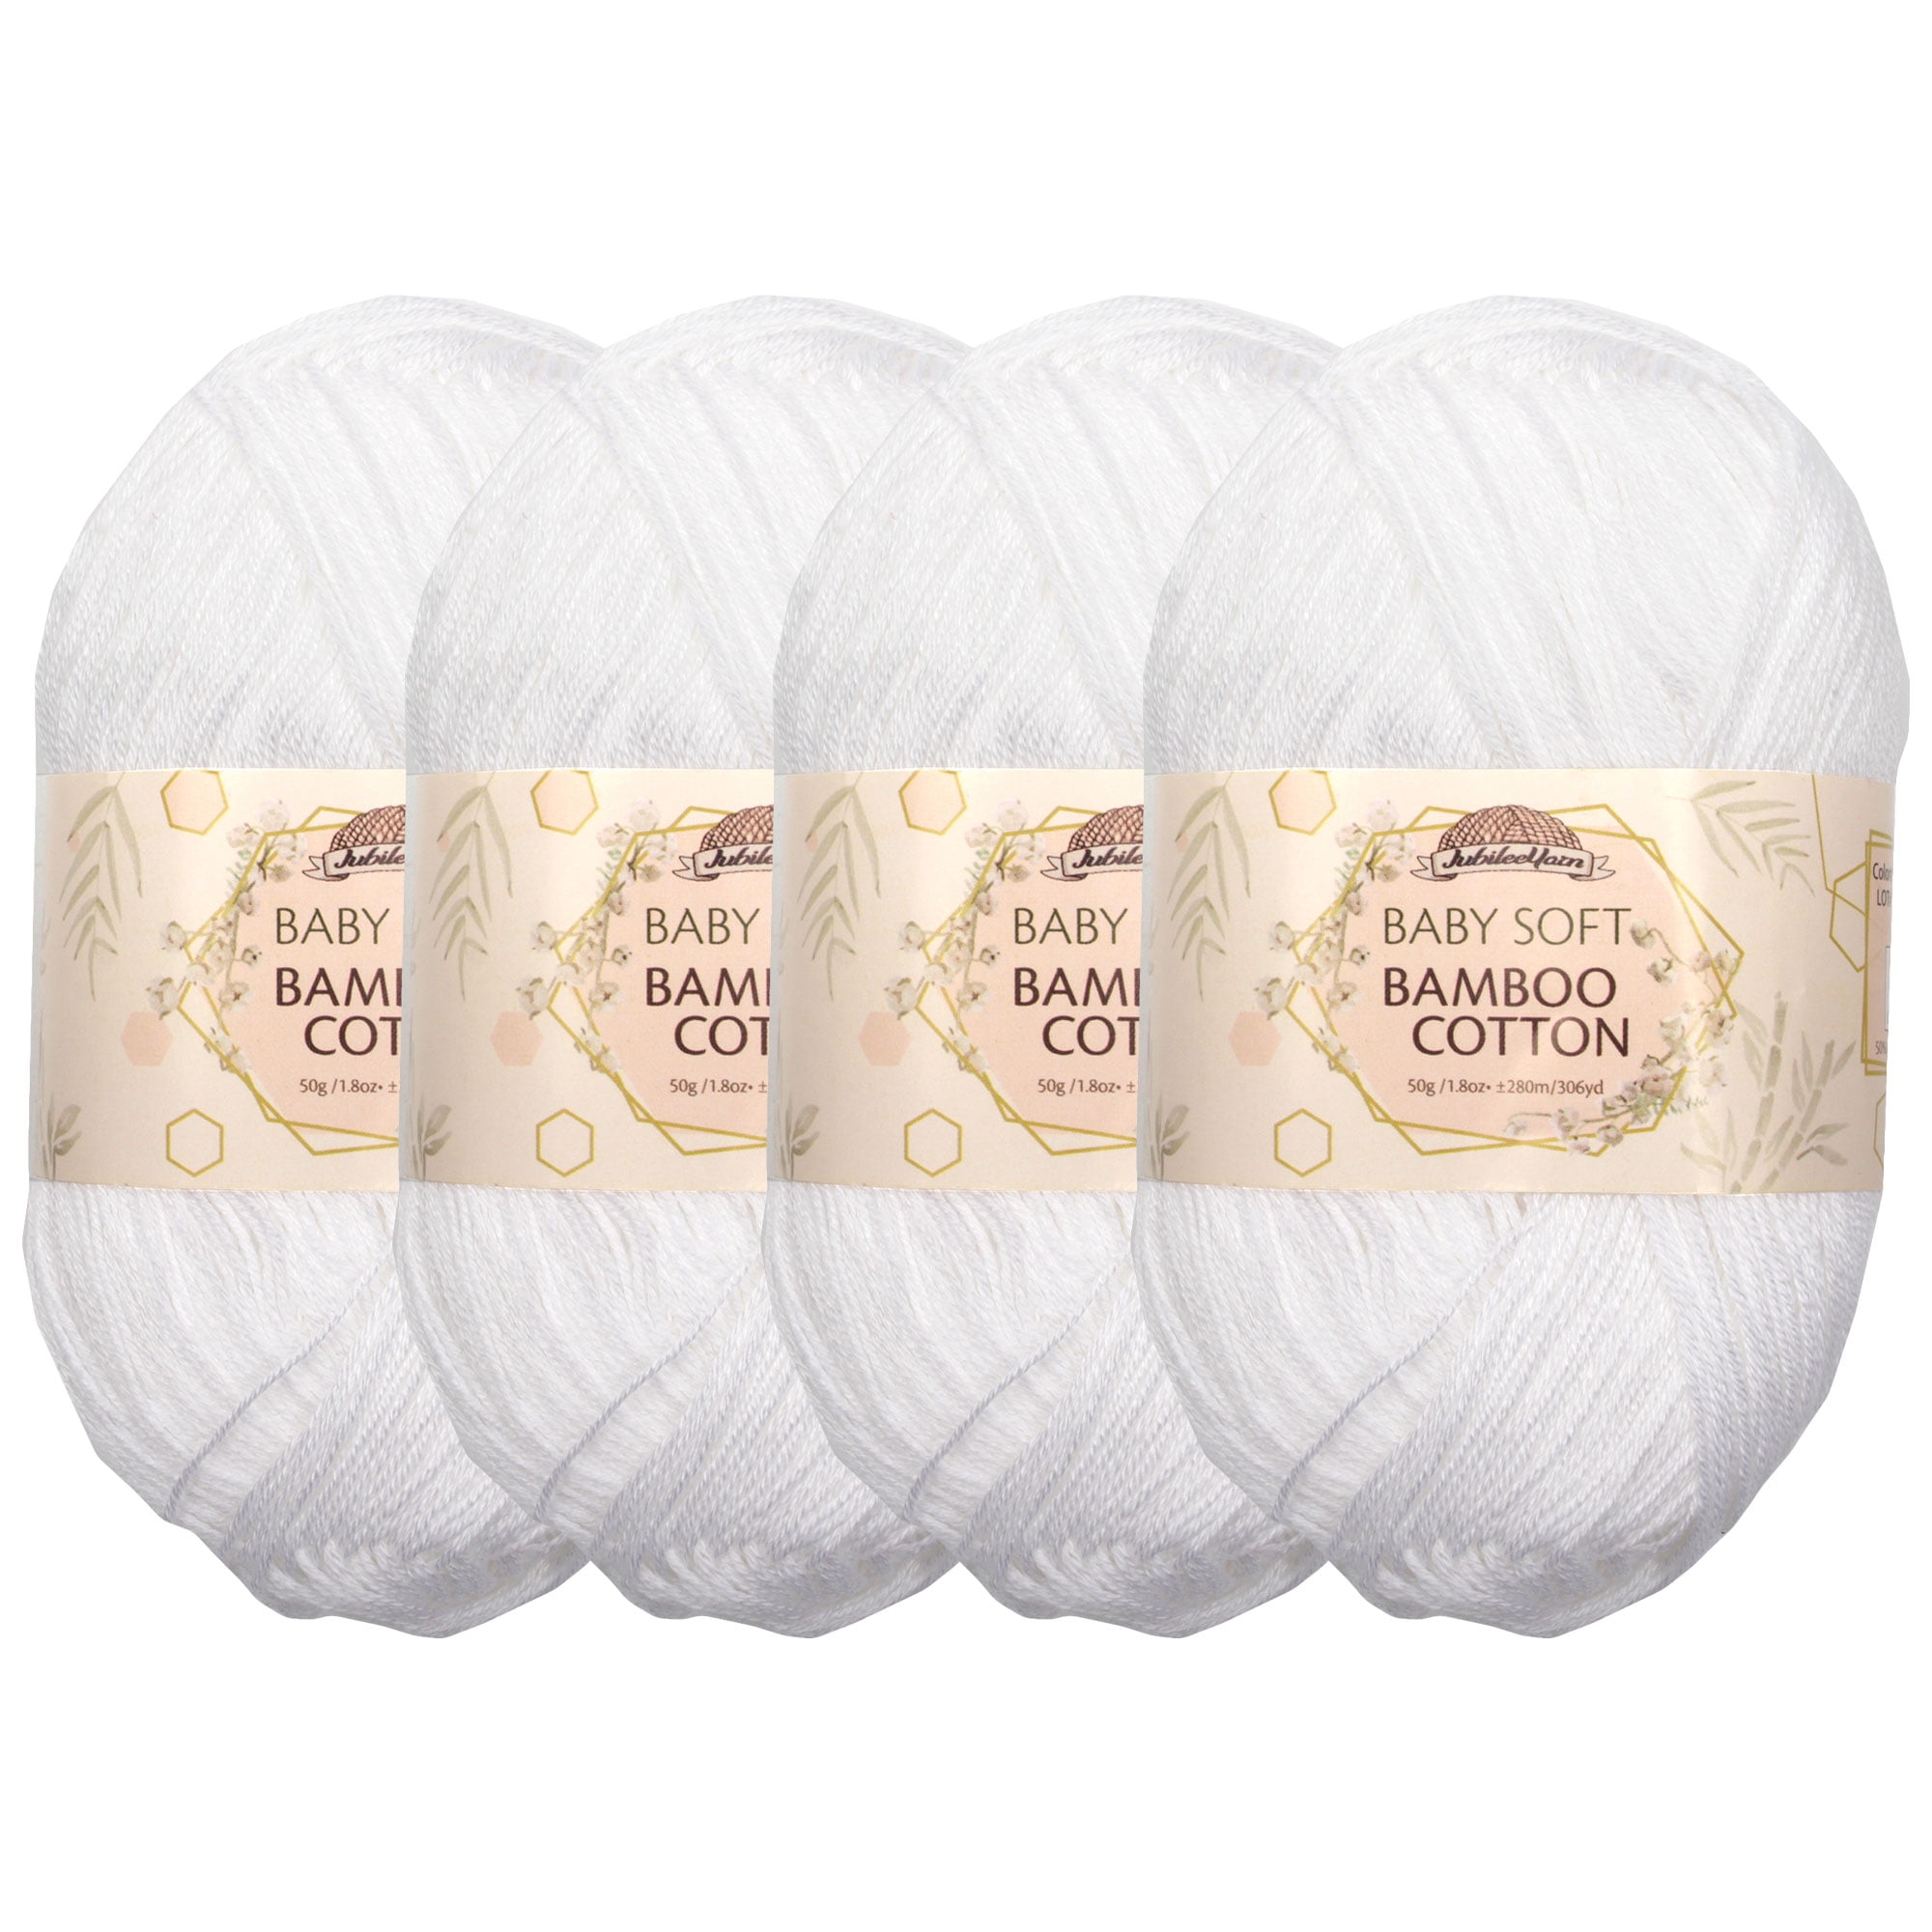  Timgle 10 Pack 280 Yards Chunky Chenille Yarn Bulk Soft Blanket  Chunky Yarn for Crocheting Knitting for DIY Crafts Supplies (Beige and  White)